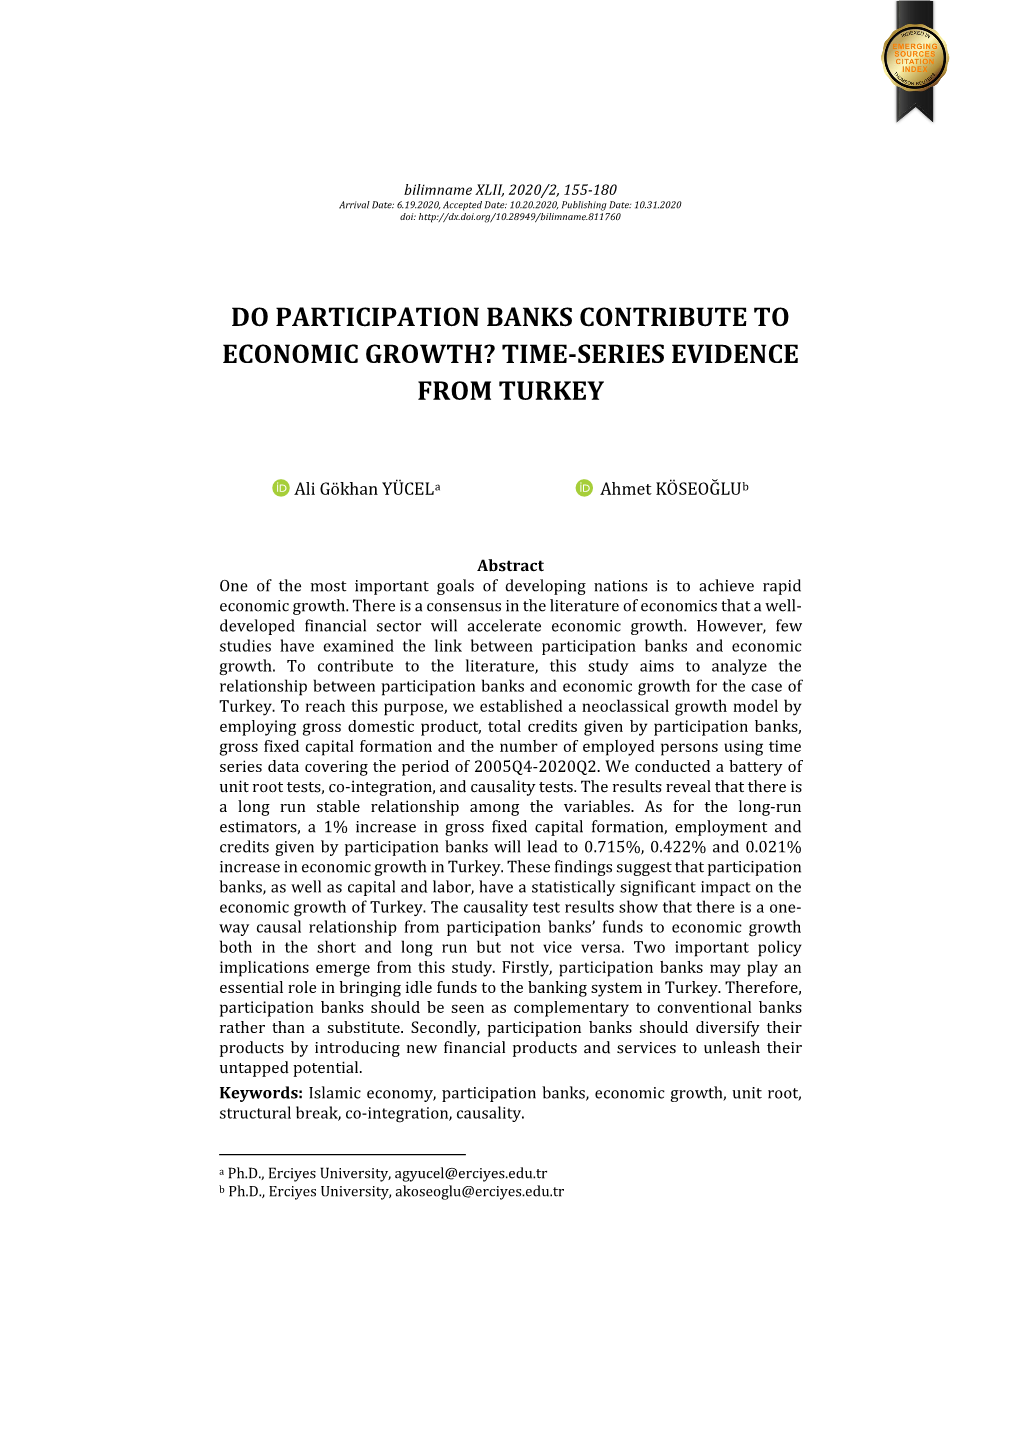 Do Participation Banks Contribute to Economic Growth? Time-Series Evidence from Turkey